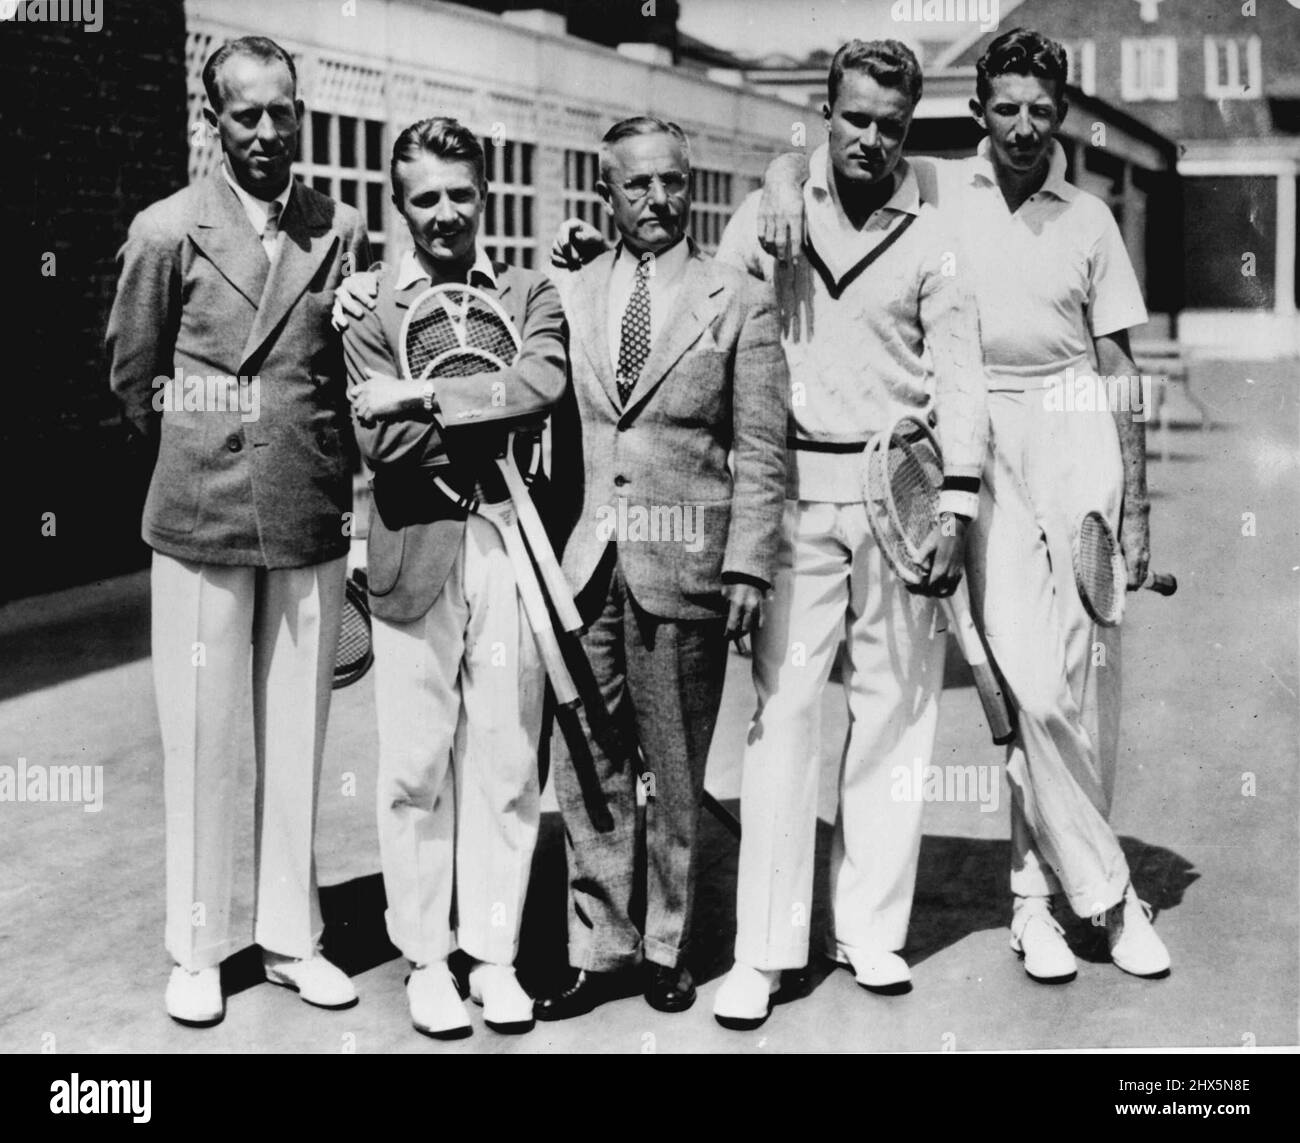 Ready for matches with Australia - With Davis Cup matches set for next week with team from Australia members of U.S. team continued practice here today. Shown during a rest period are (L to R) Wilmer Allison, Bitsy Grant, Walter Pate, non-flying captain; Gene Mako and Don Budge. May 23, 1936. (Photo by Associated Press Photo). Stock Photo